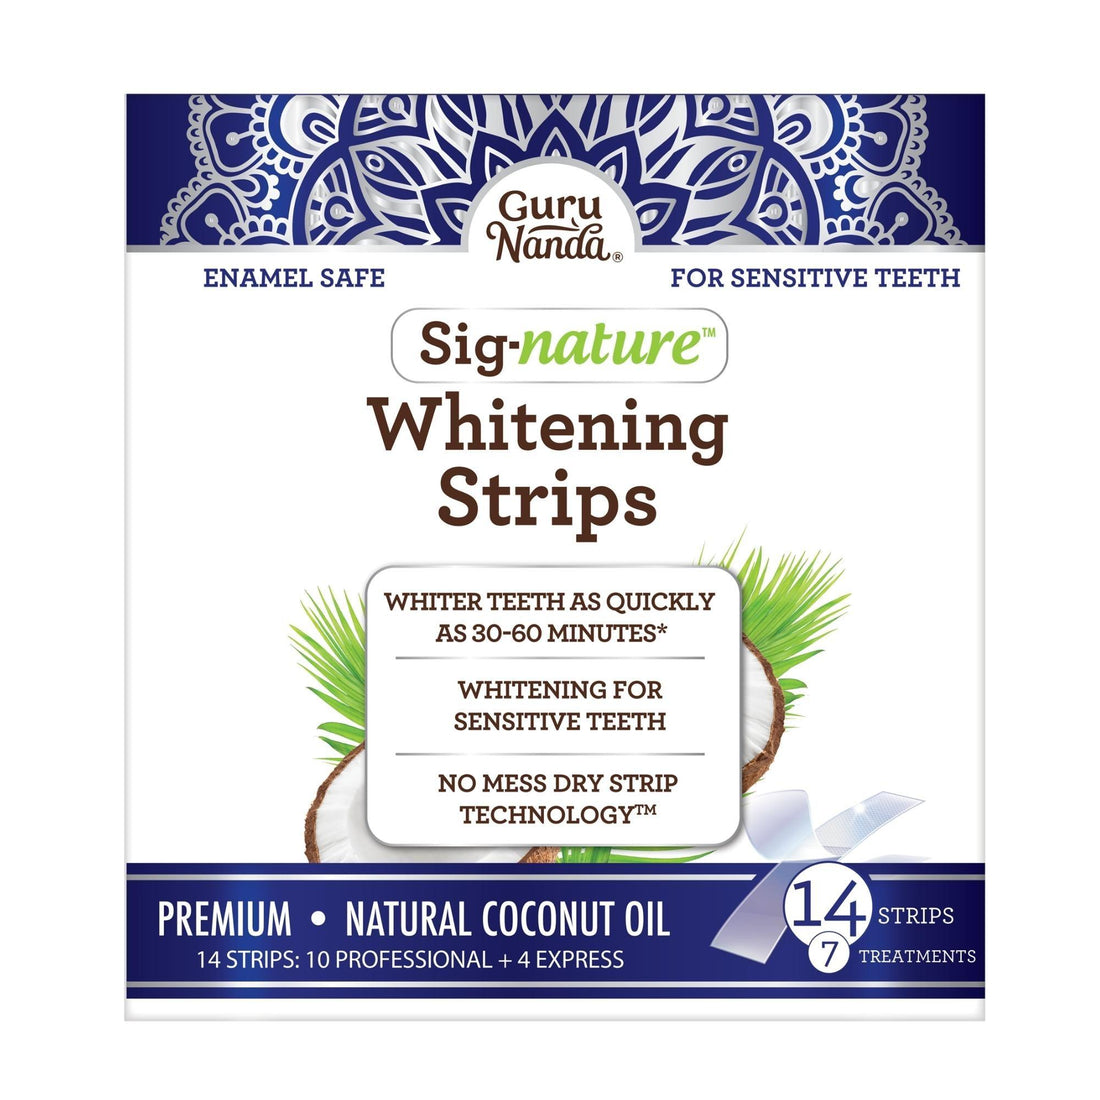 GuruNanda Coconut Oil Pulling with 7 Natural Essential Oils and